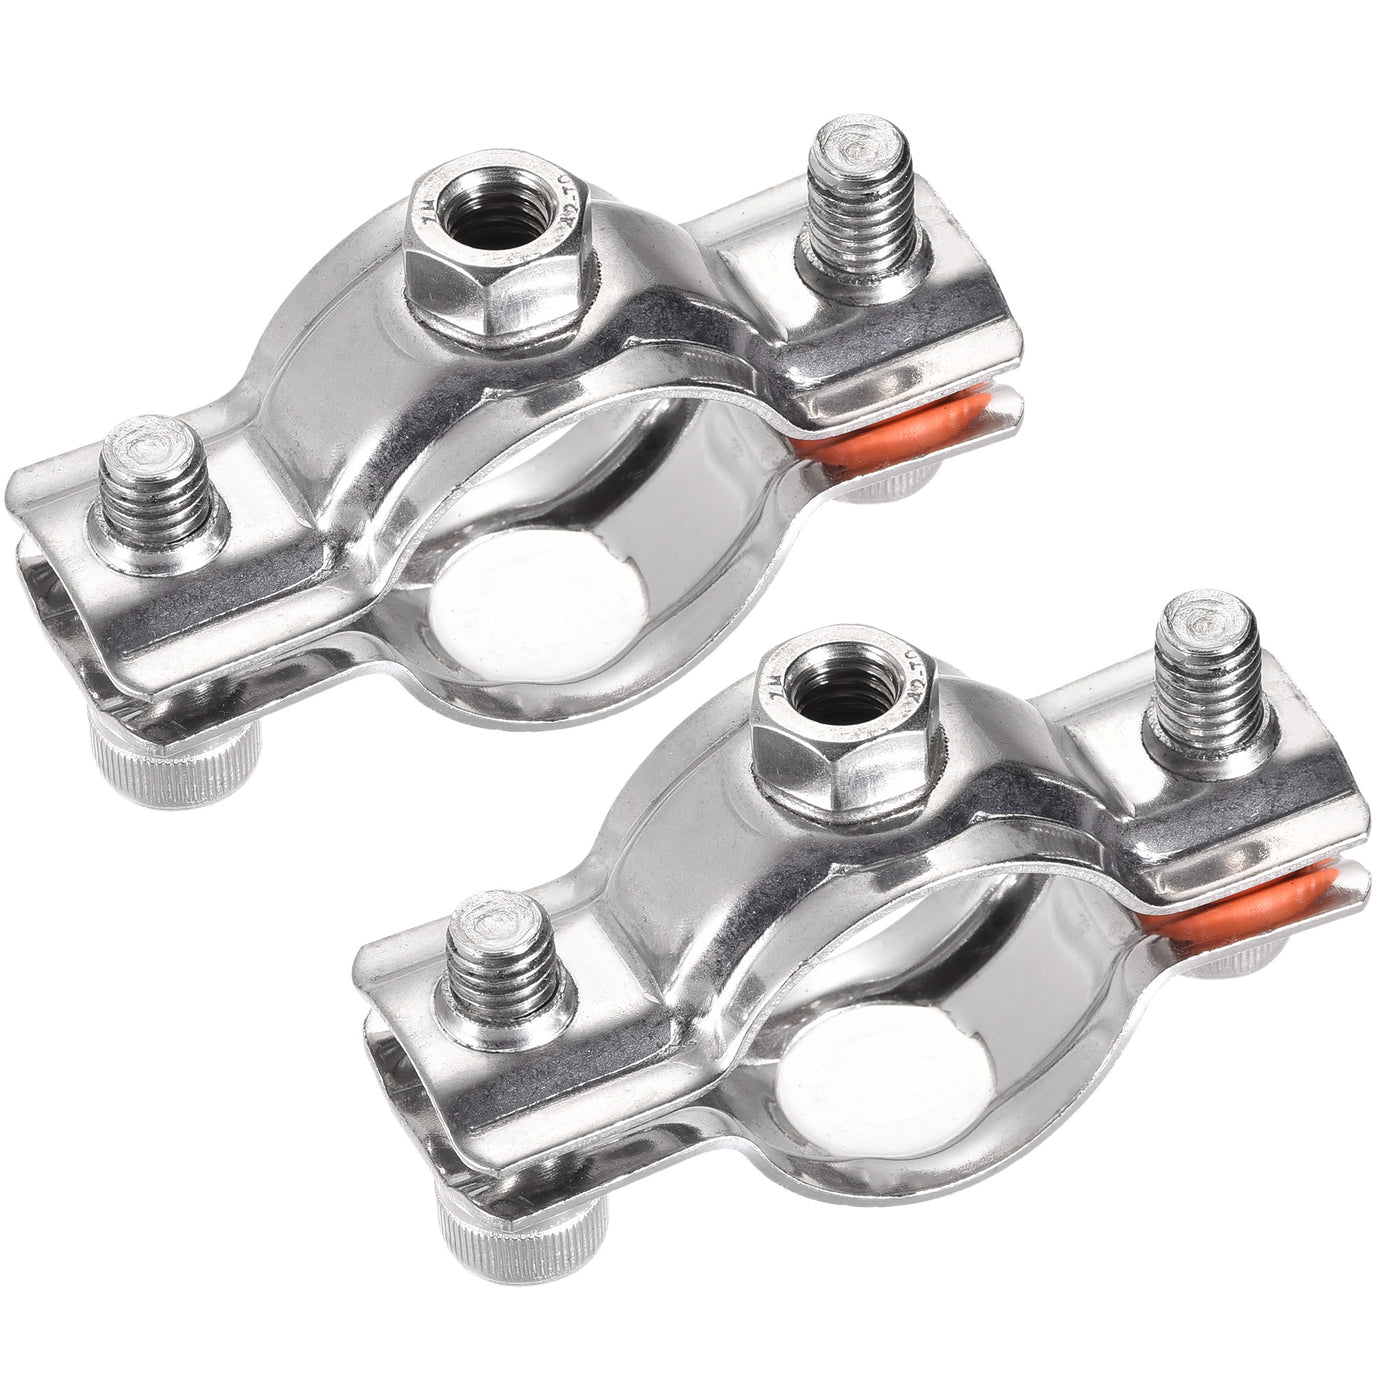 Uxcell Uxcell Wall Ceiling Mount Pipe Supports, 304 Stainless Steel Adjustable Pipe Bracket Clamp for 25-28mm Pipe 2pcs